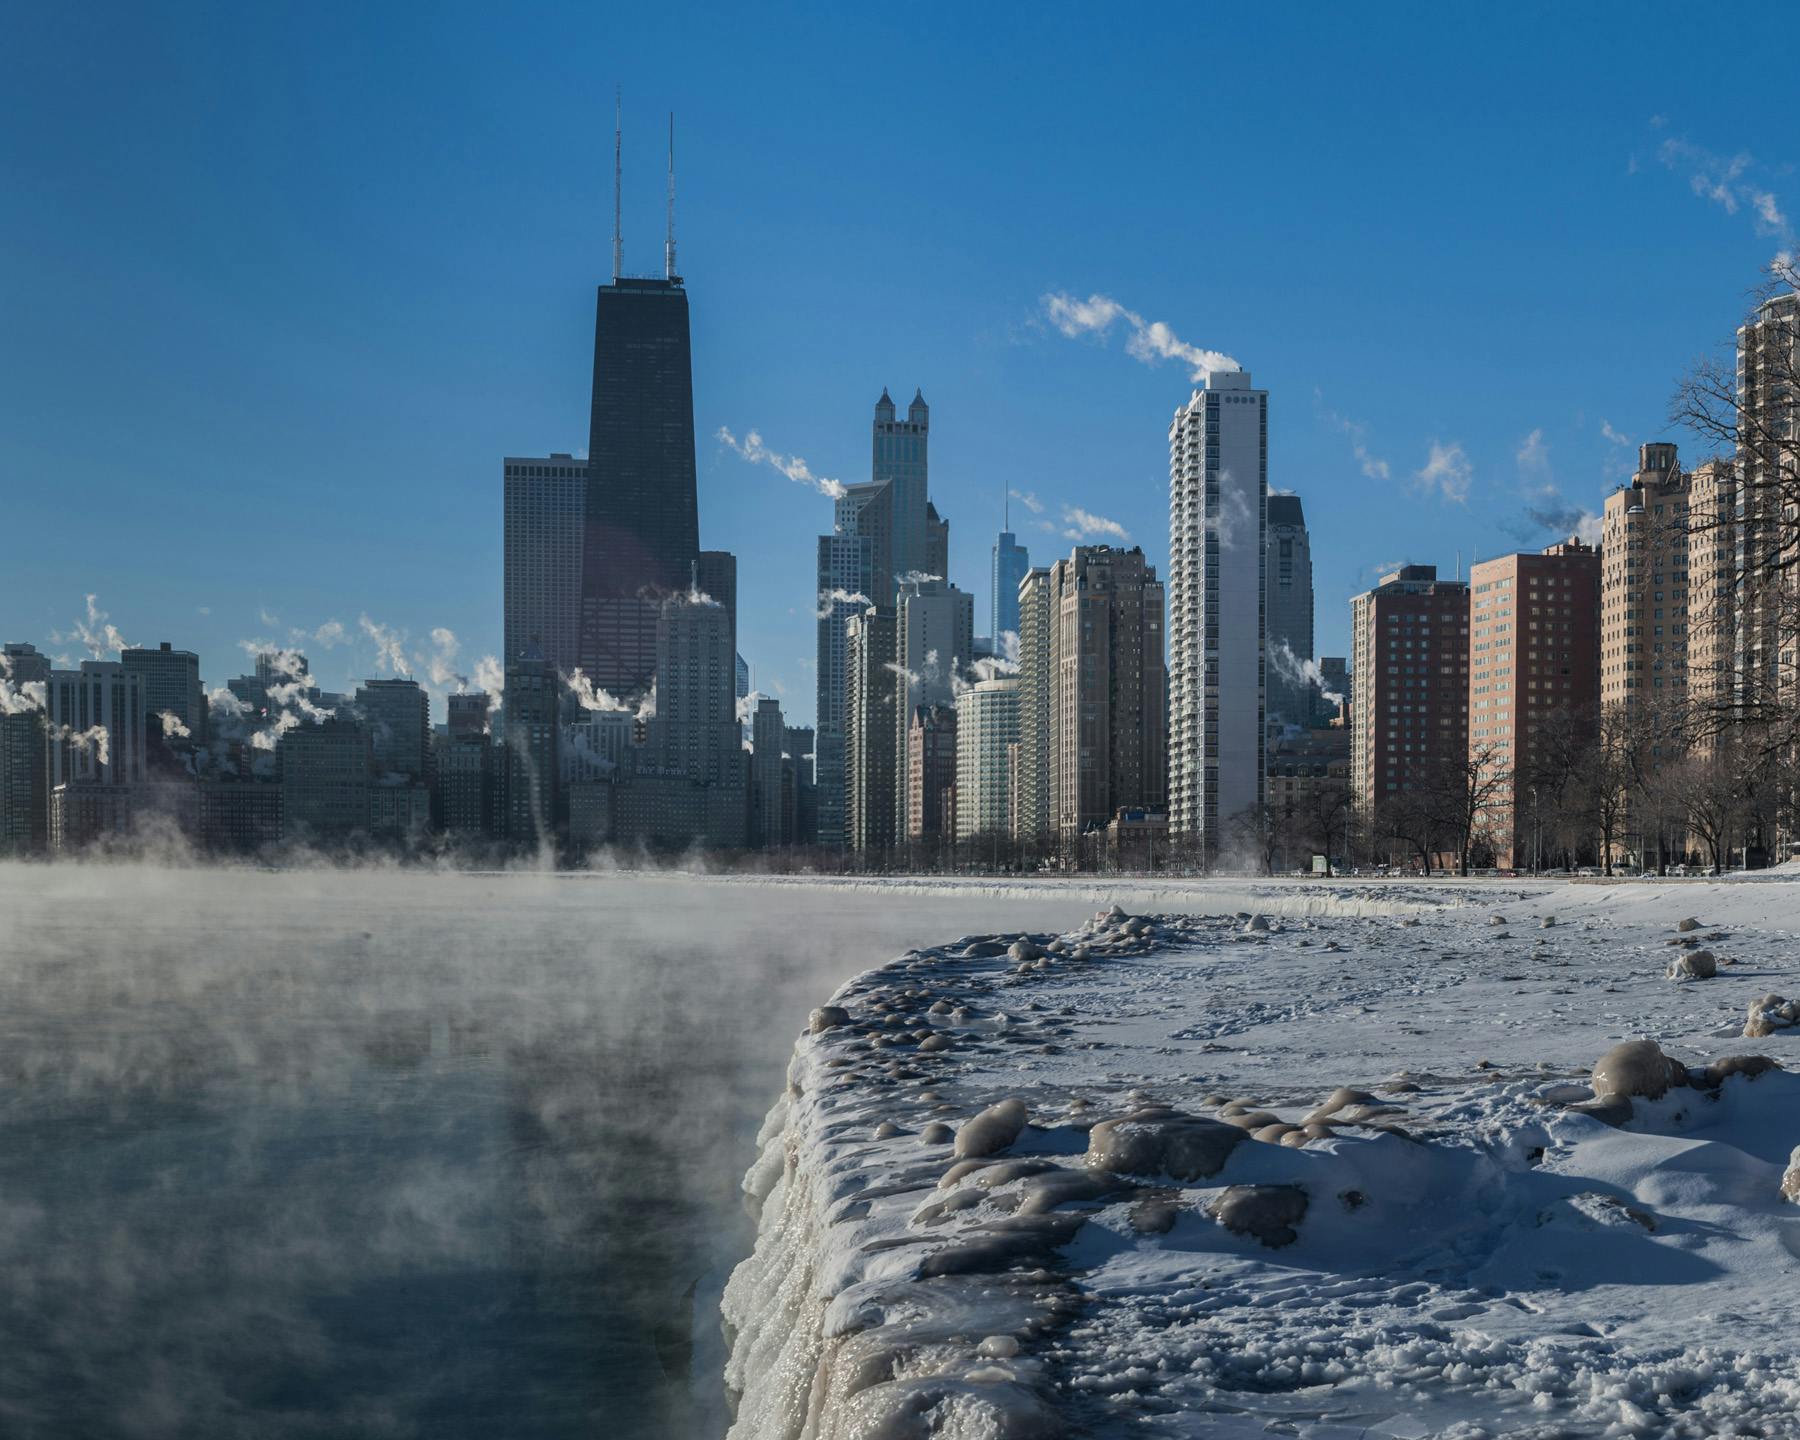 on one of those crazy cold Chicago winter mornings, I took this shot of the skyline with all the steam billowing off the towers and the lake. this shot was taken from the North Ave beach area